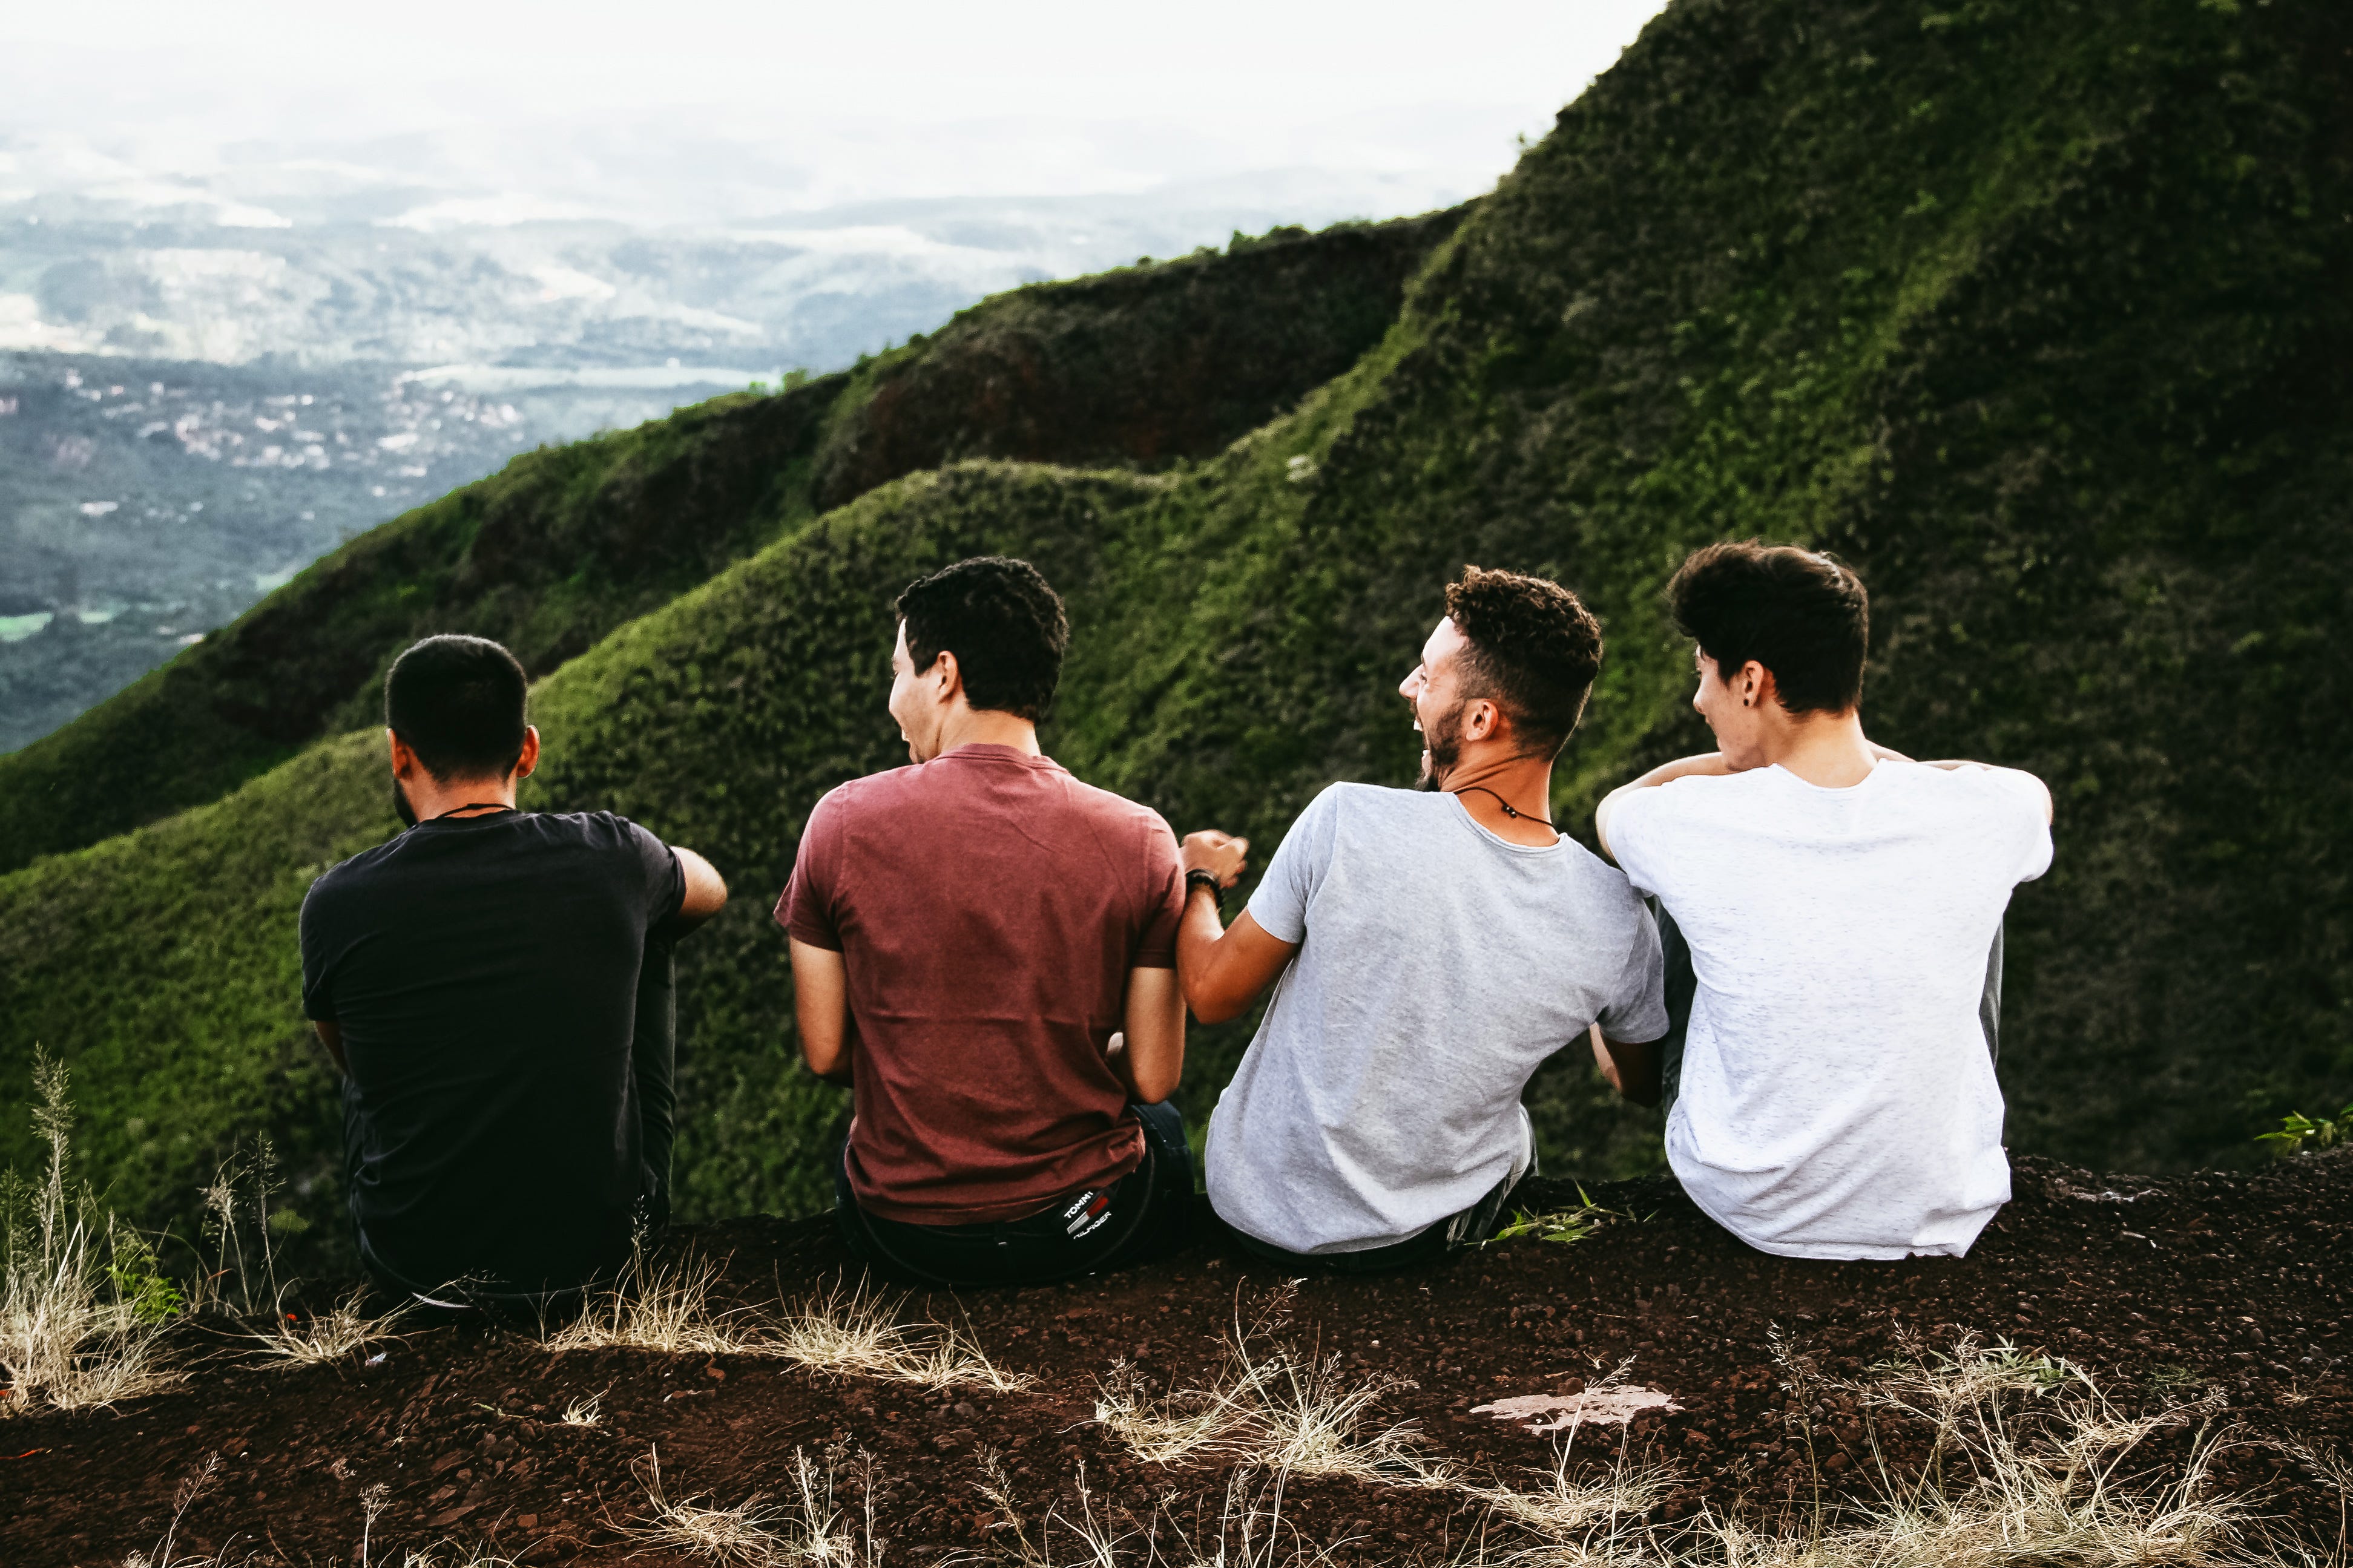 Why Is Friendship Important in Life? Here's Why